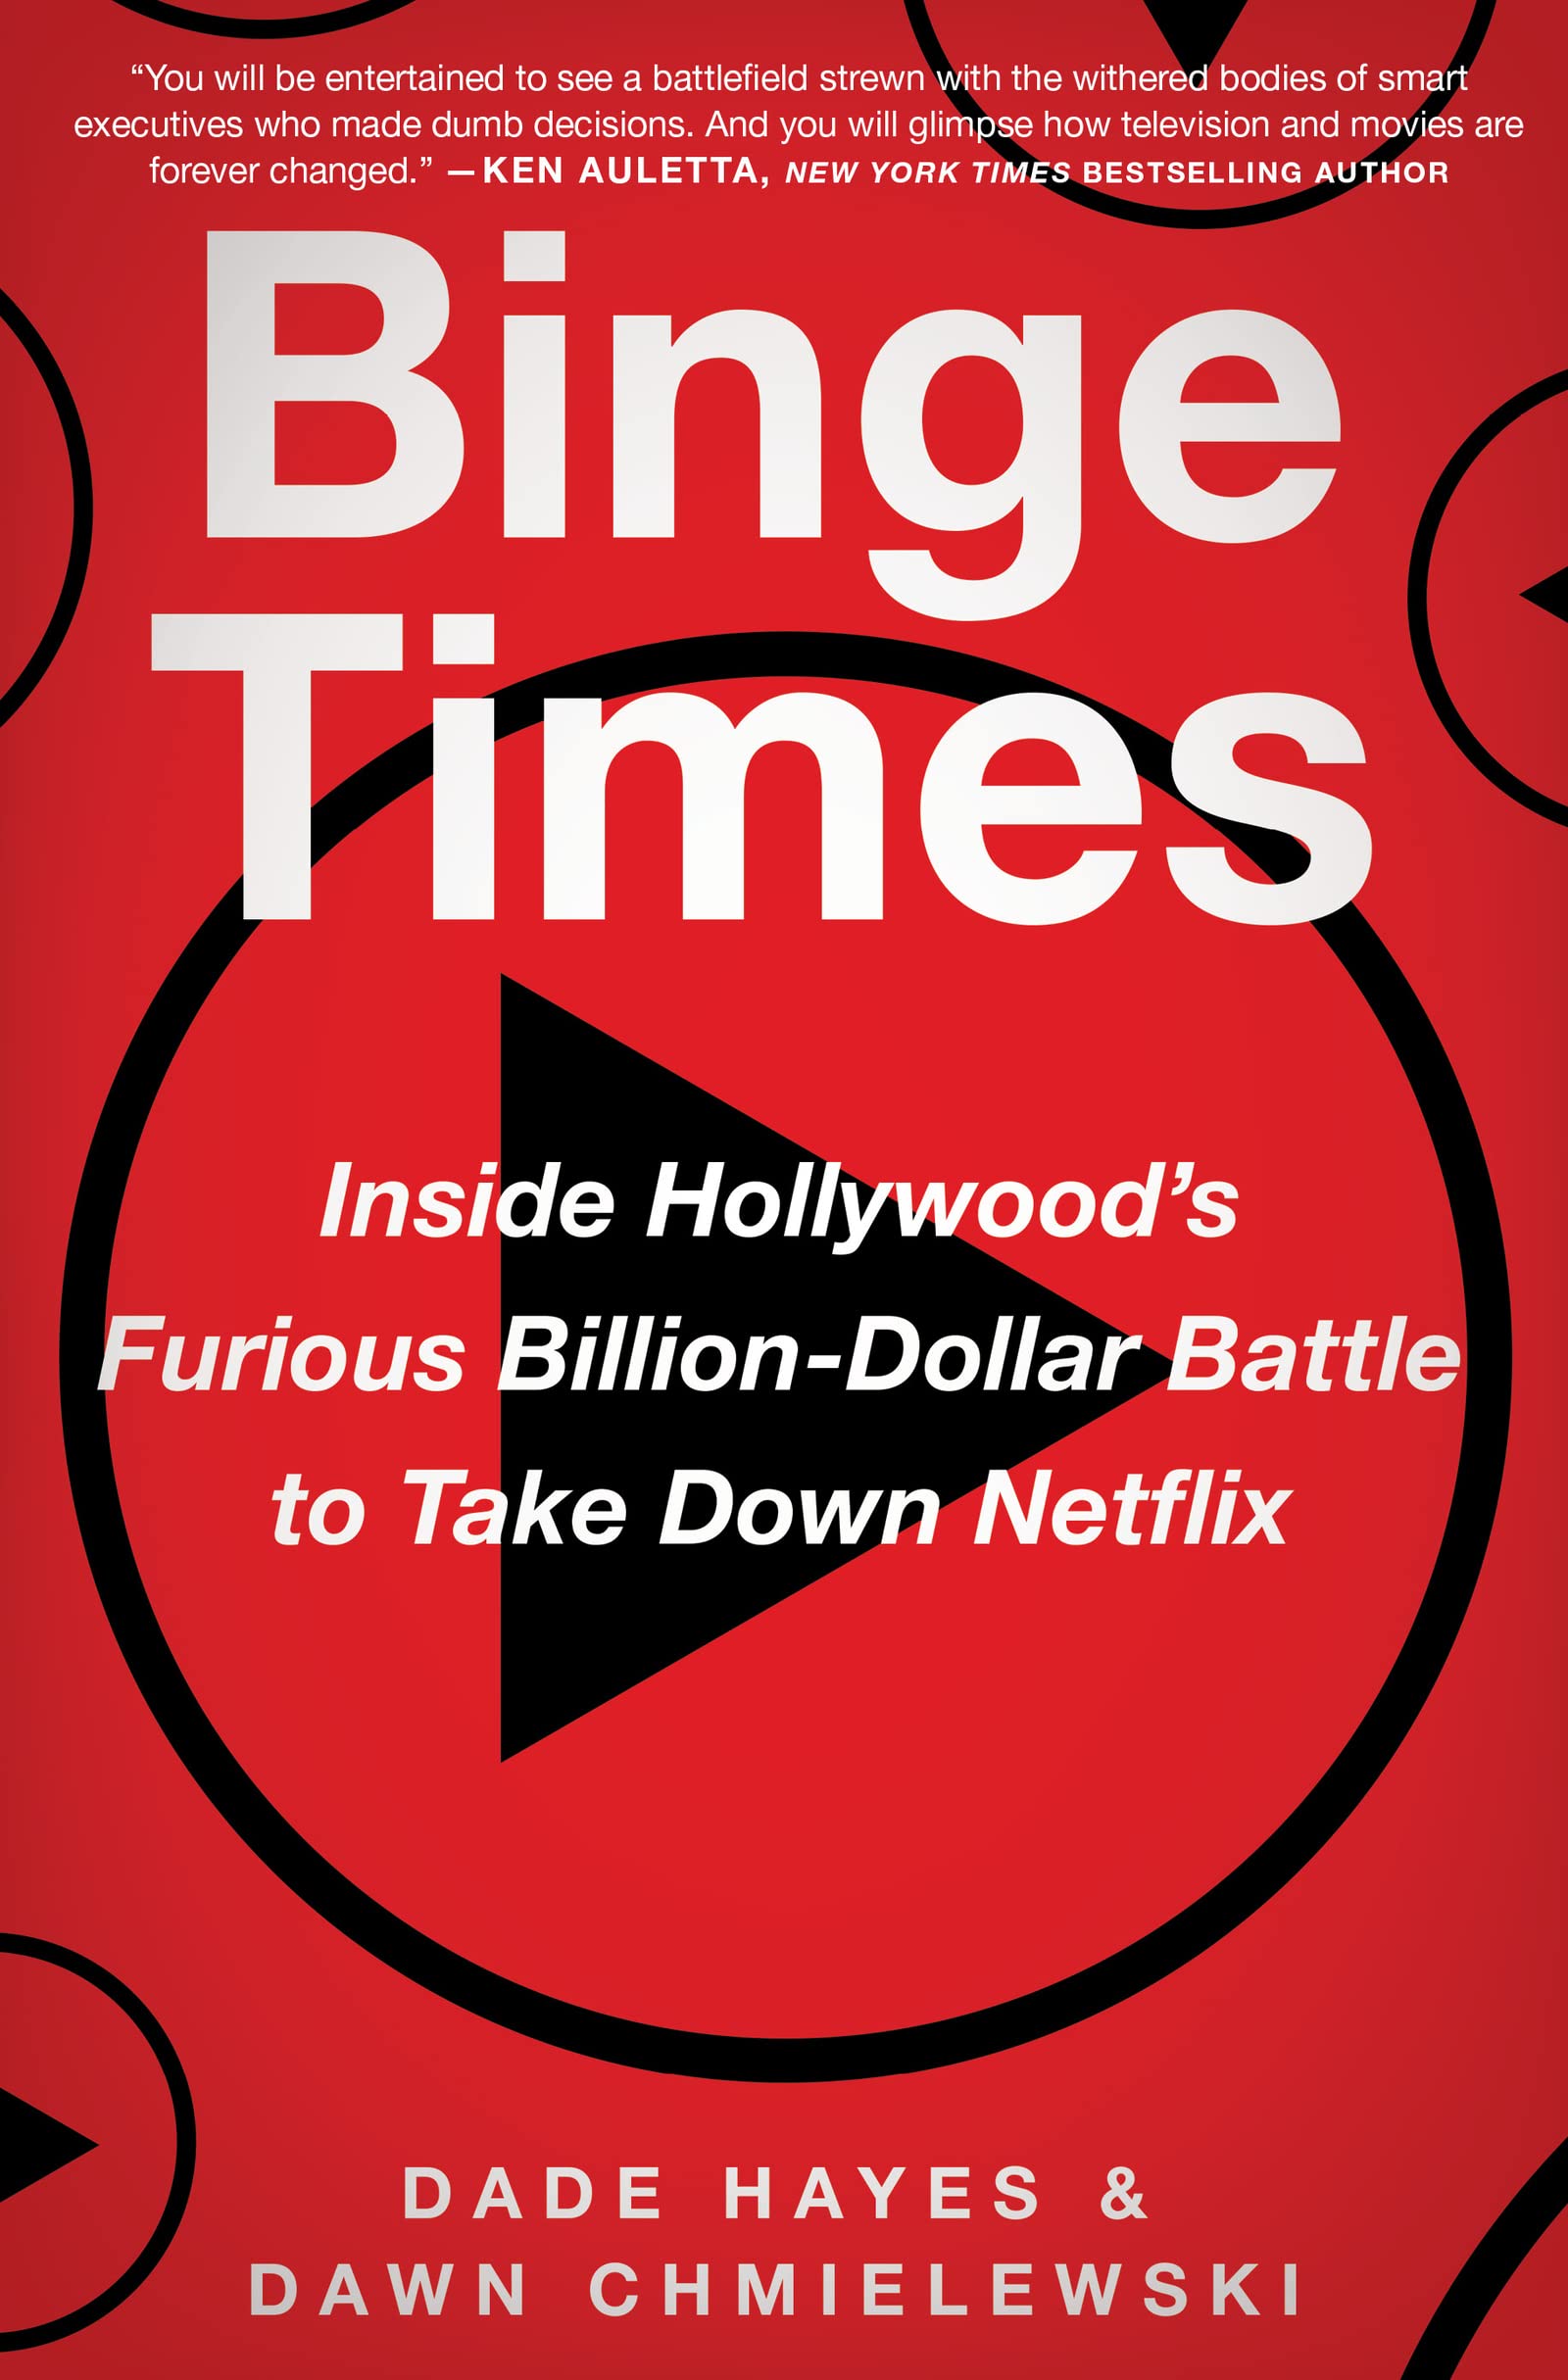 binge times book review